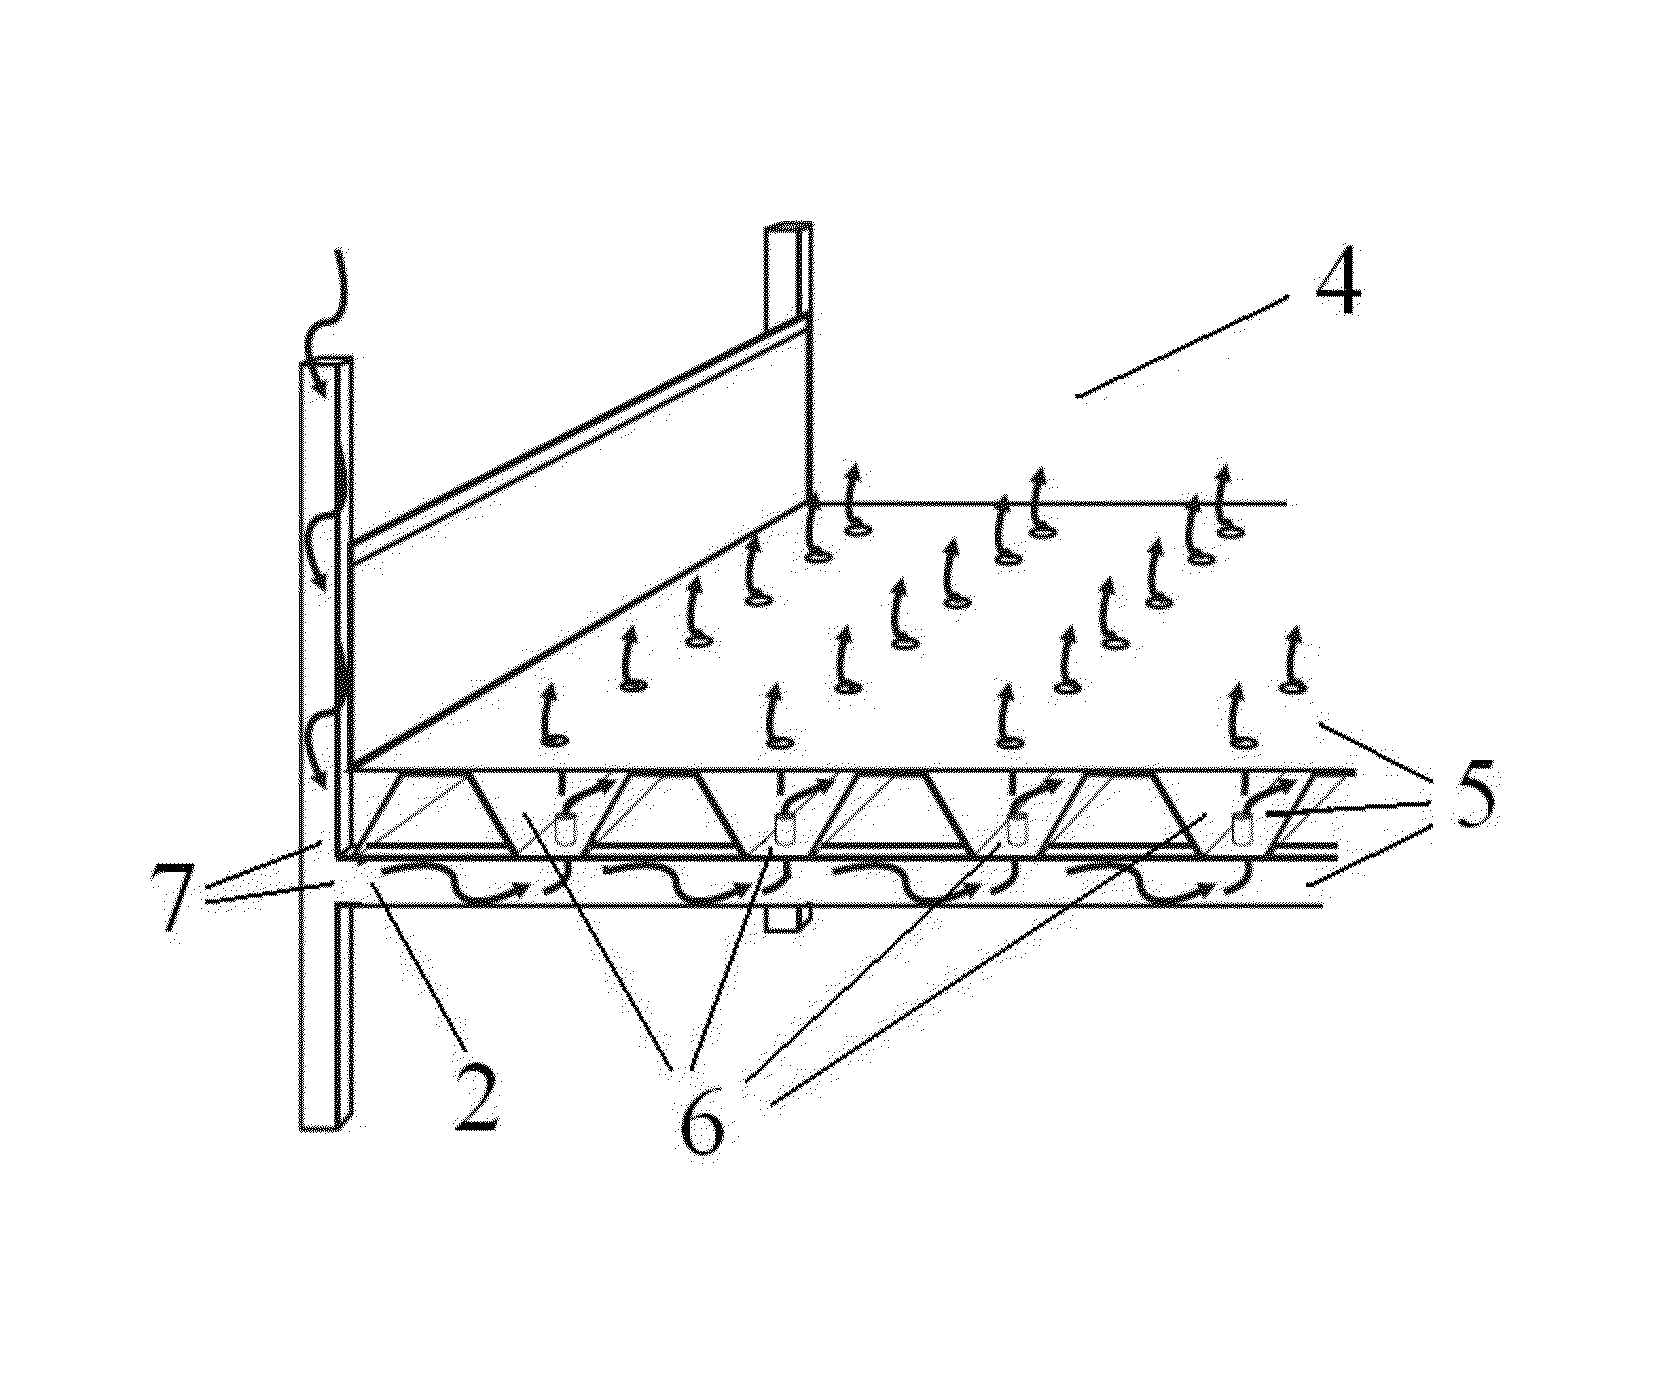 Localized aeration equipment for growing champignons and other cultivated mushrooms and the method of its usage